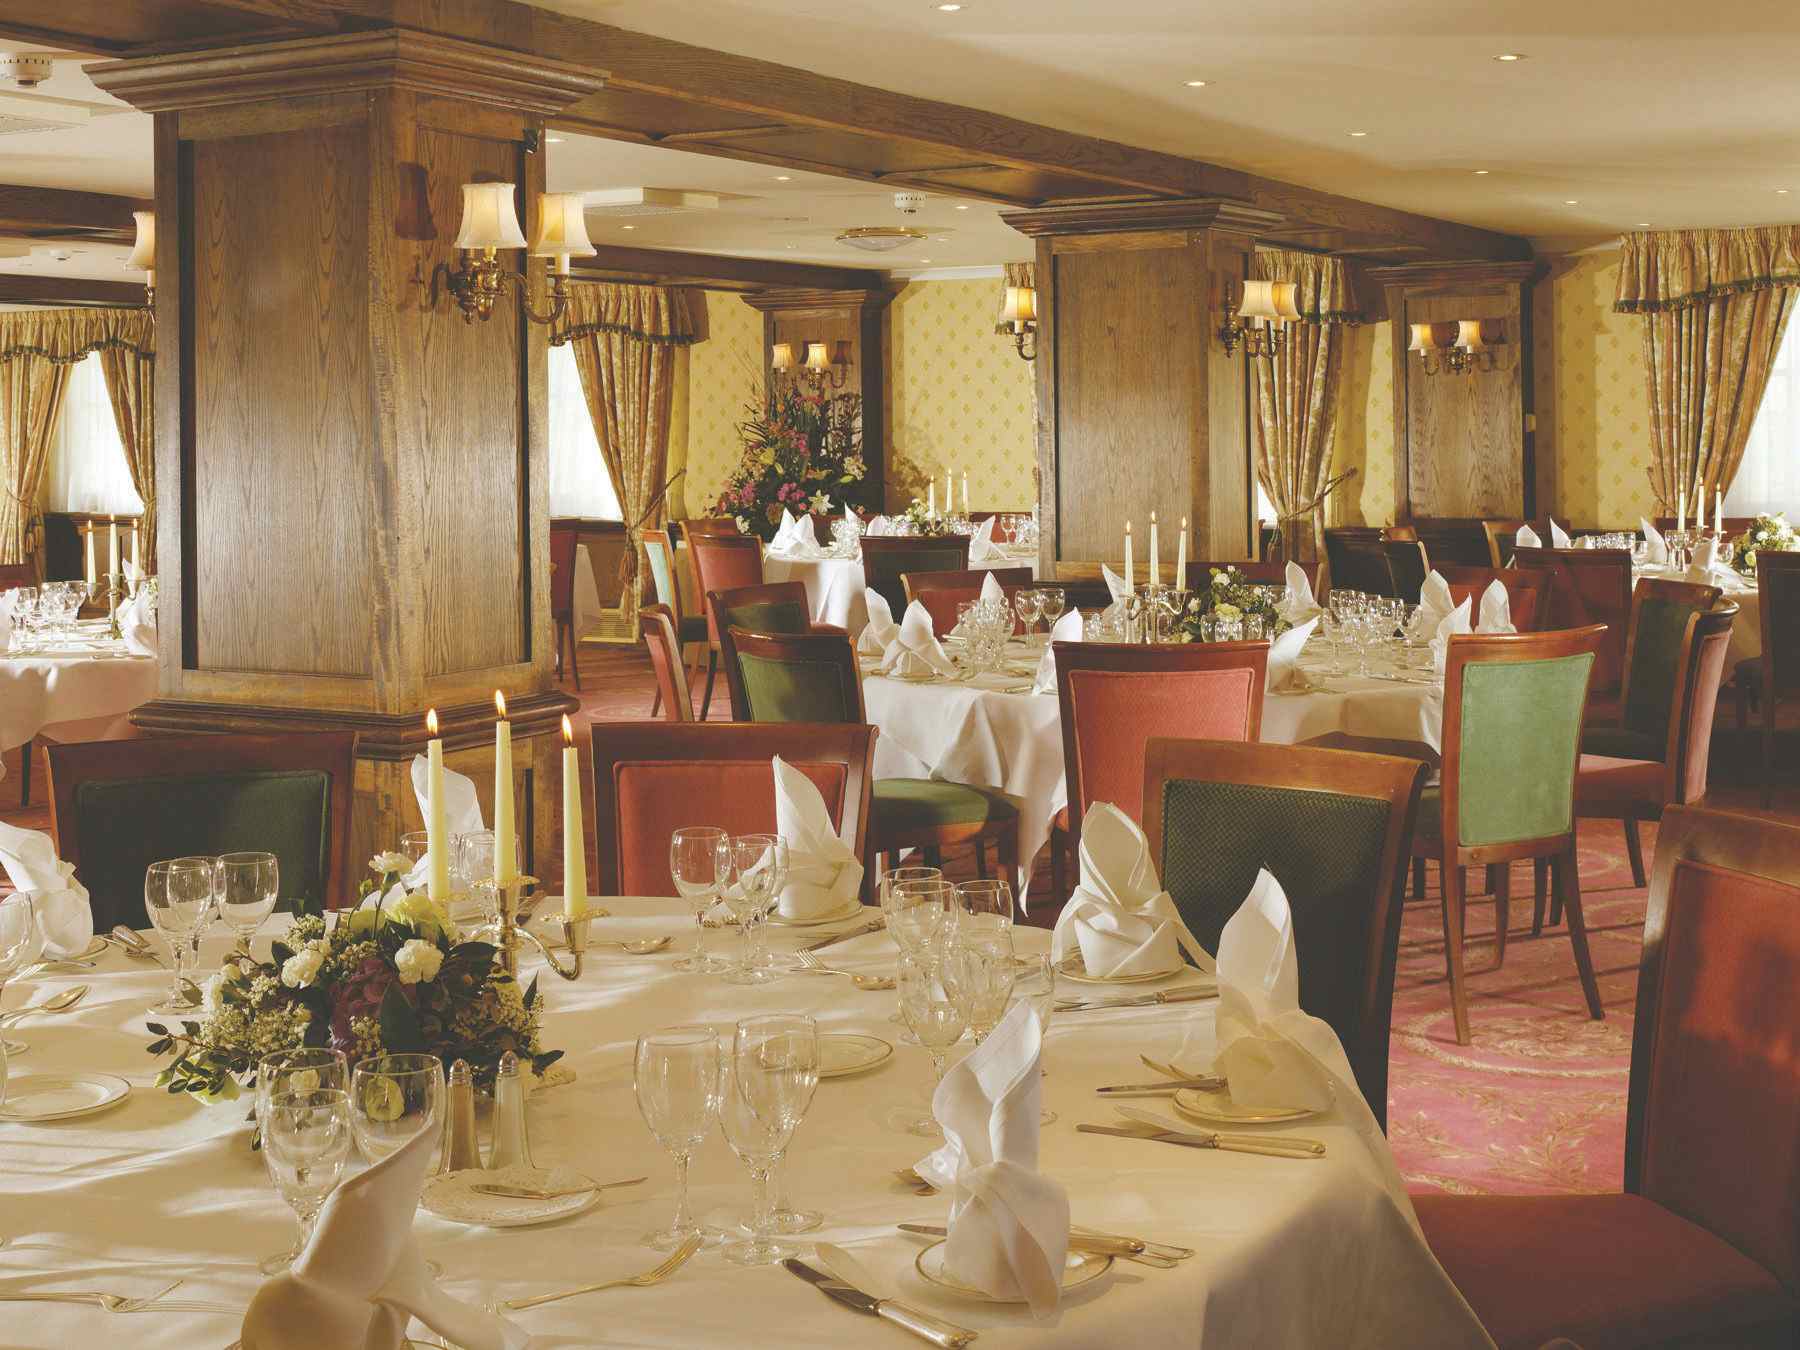 Silverdale Room, The Grand 